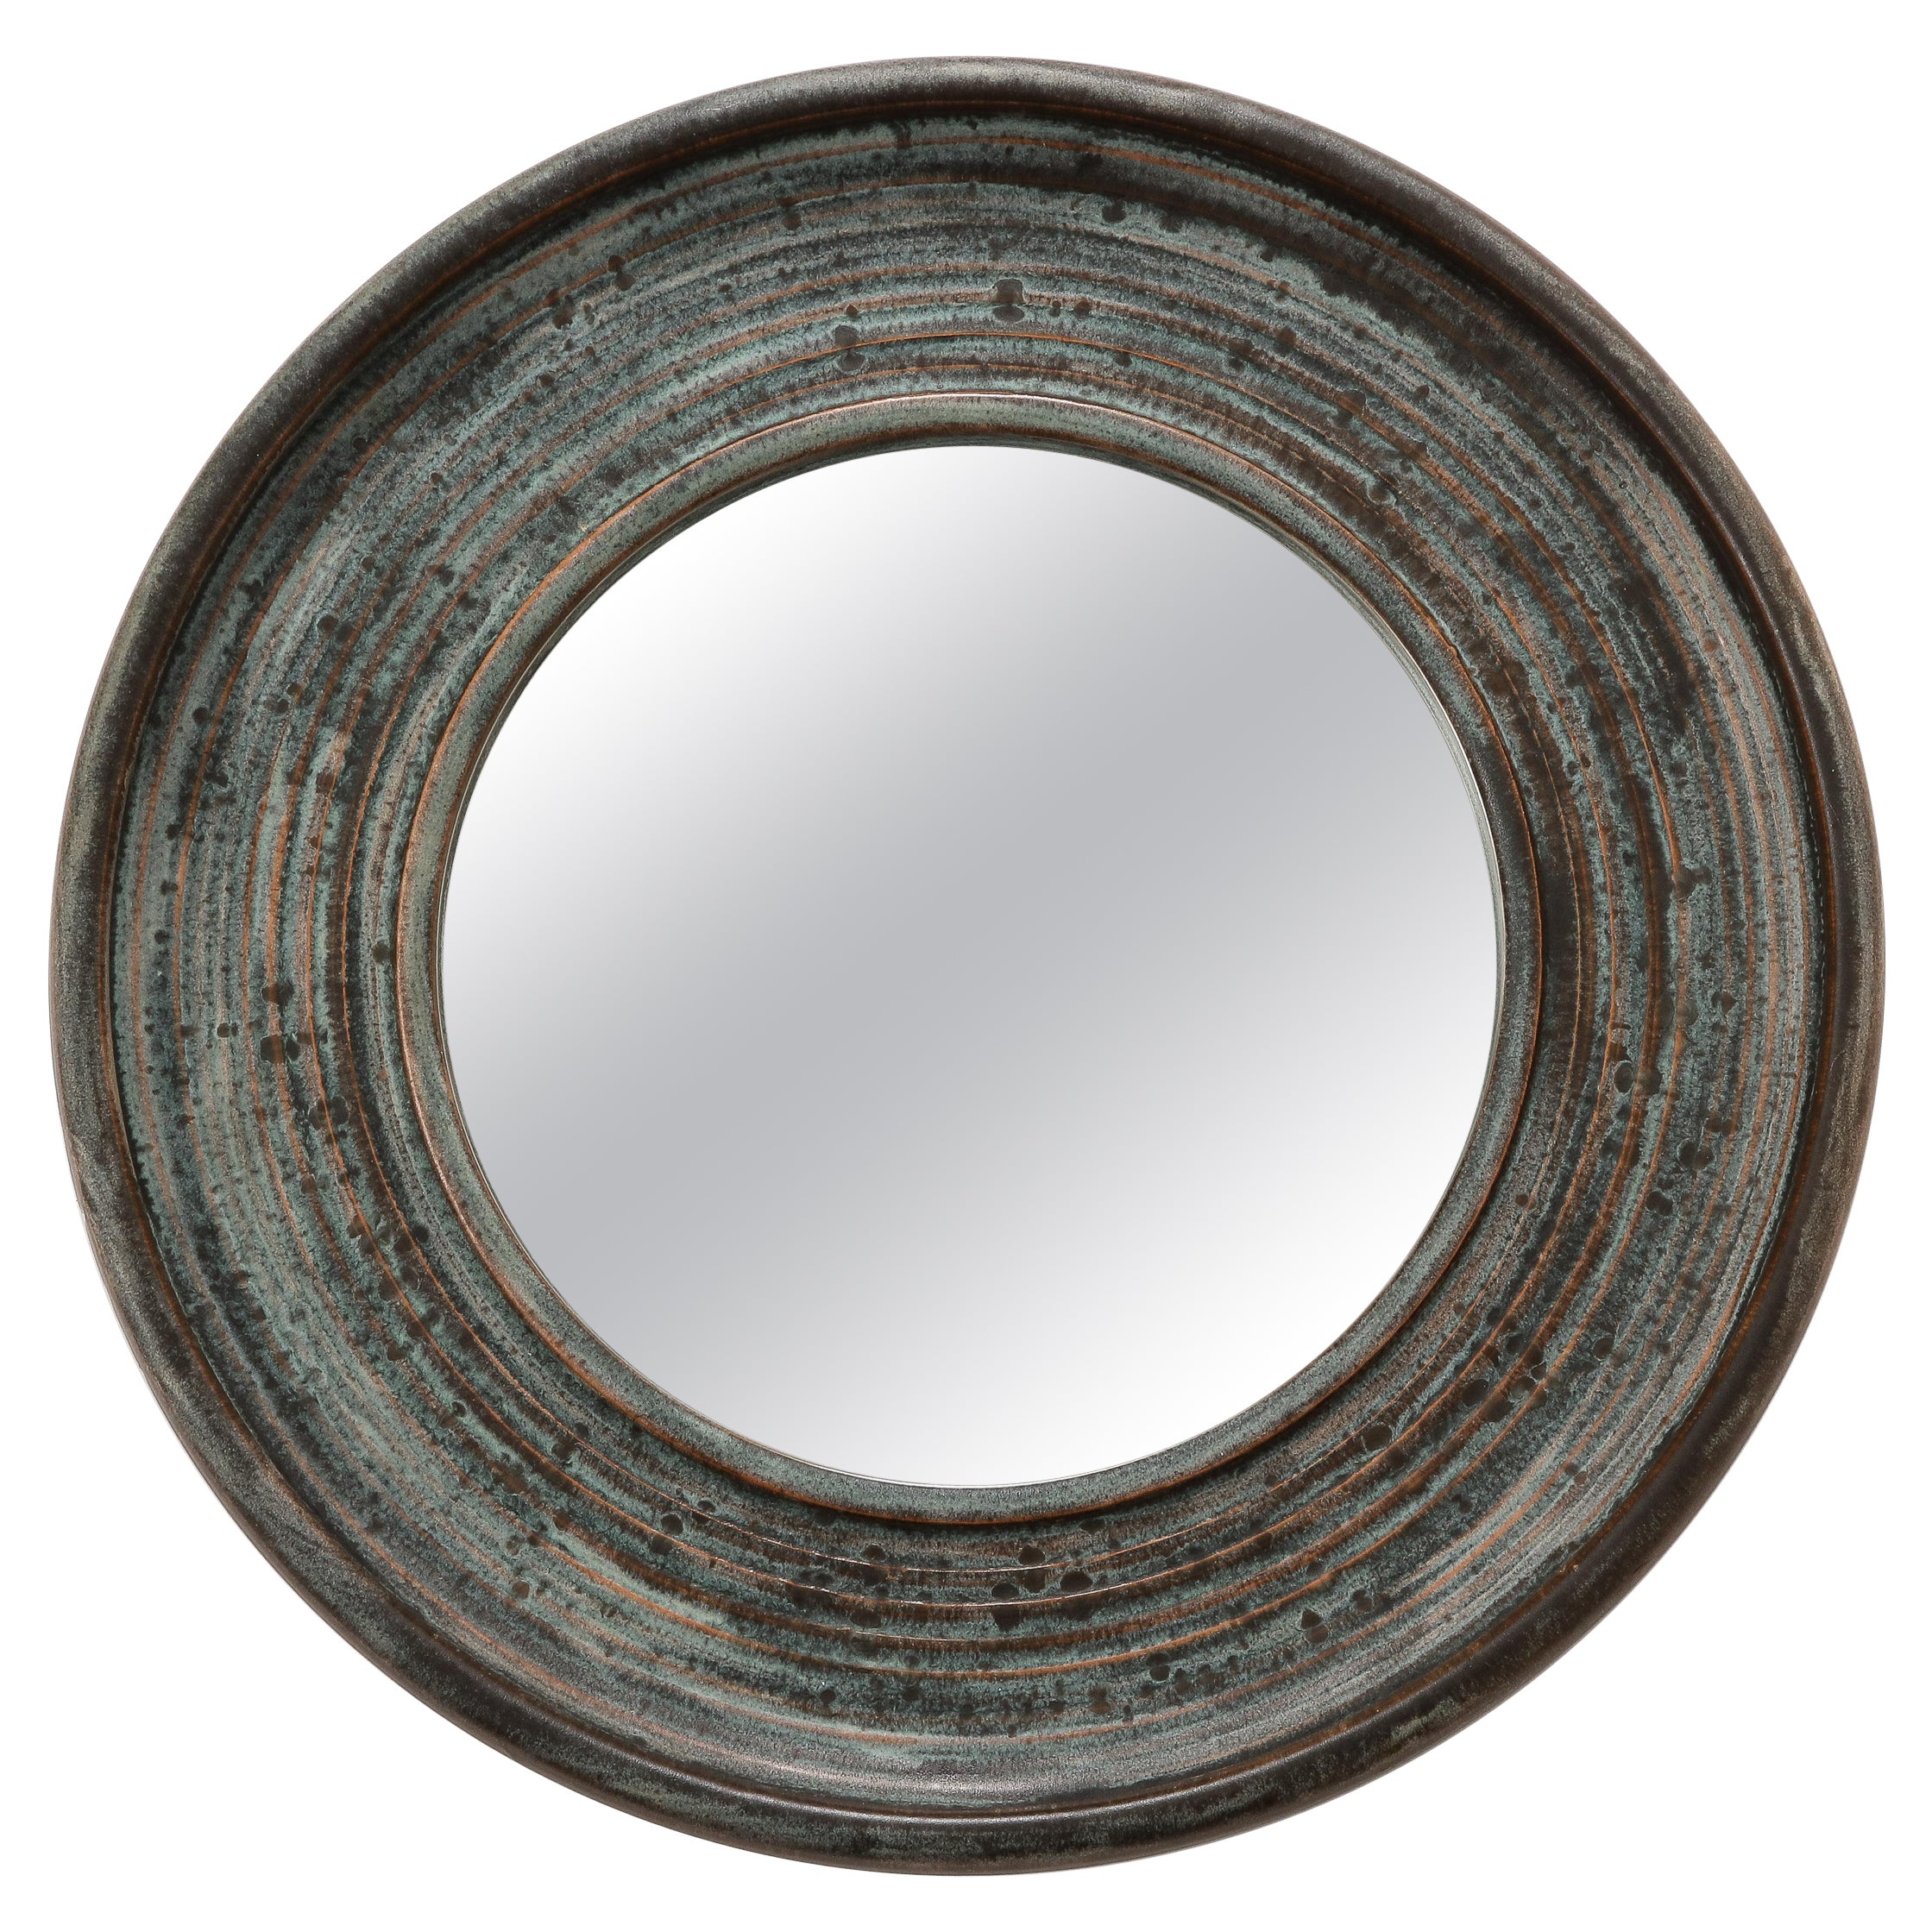 Round Petite Signed Blue and Grey Ceramic Wall Mirror - France 1970's For Sale